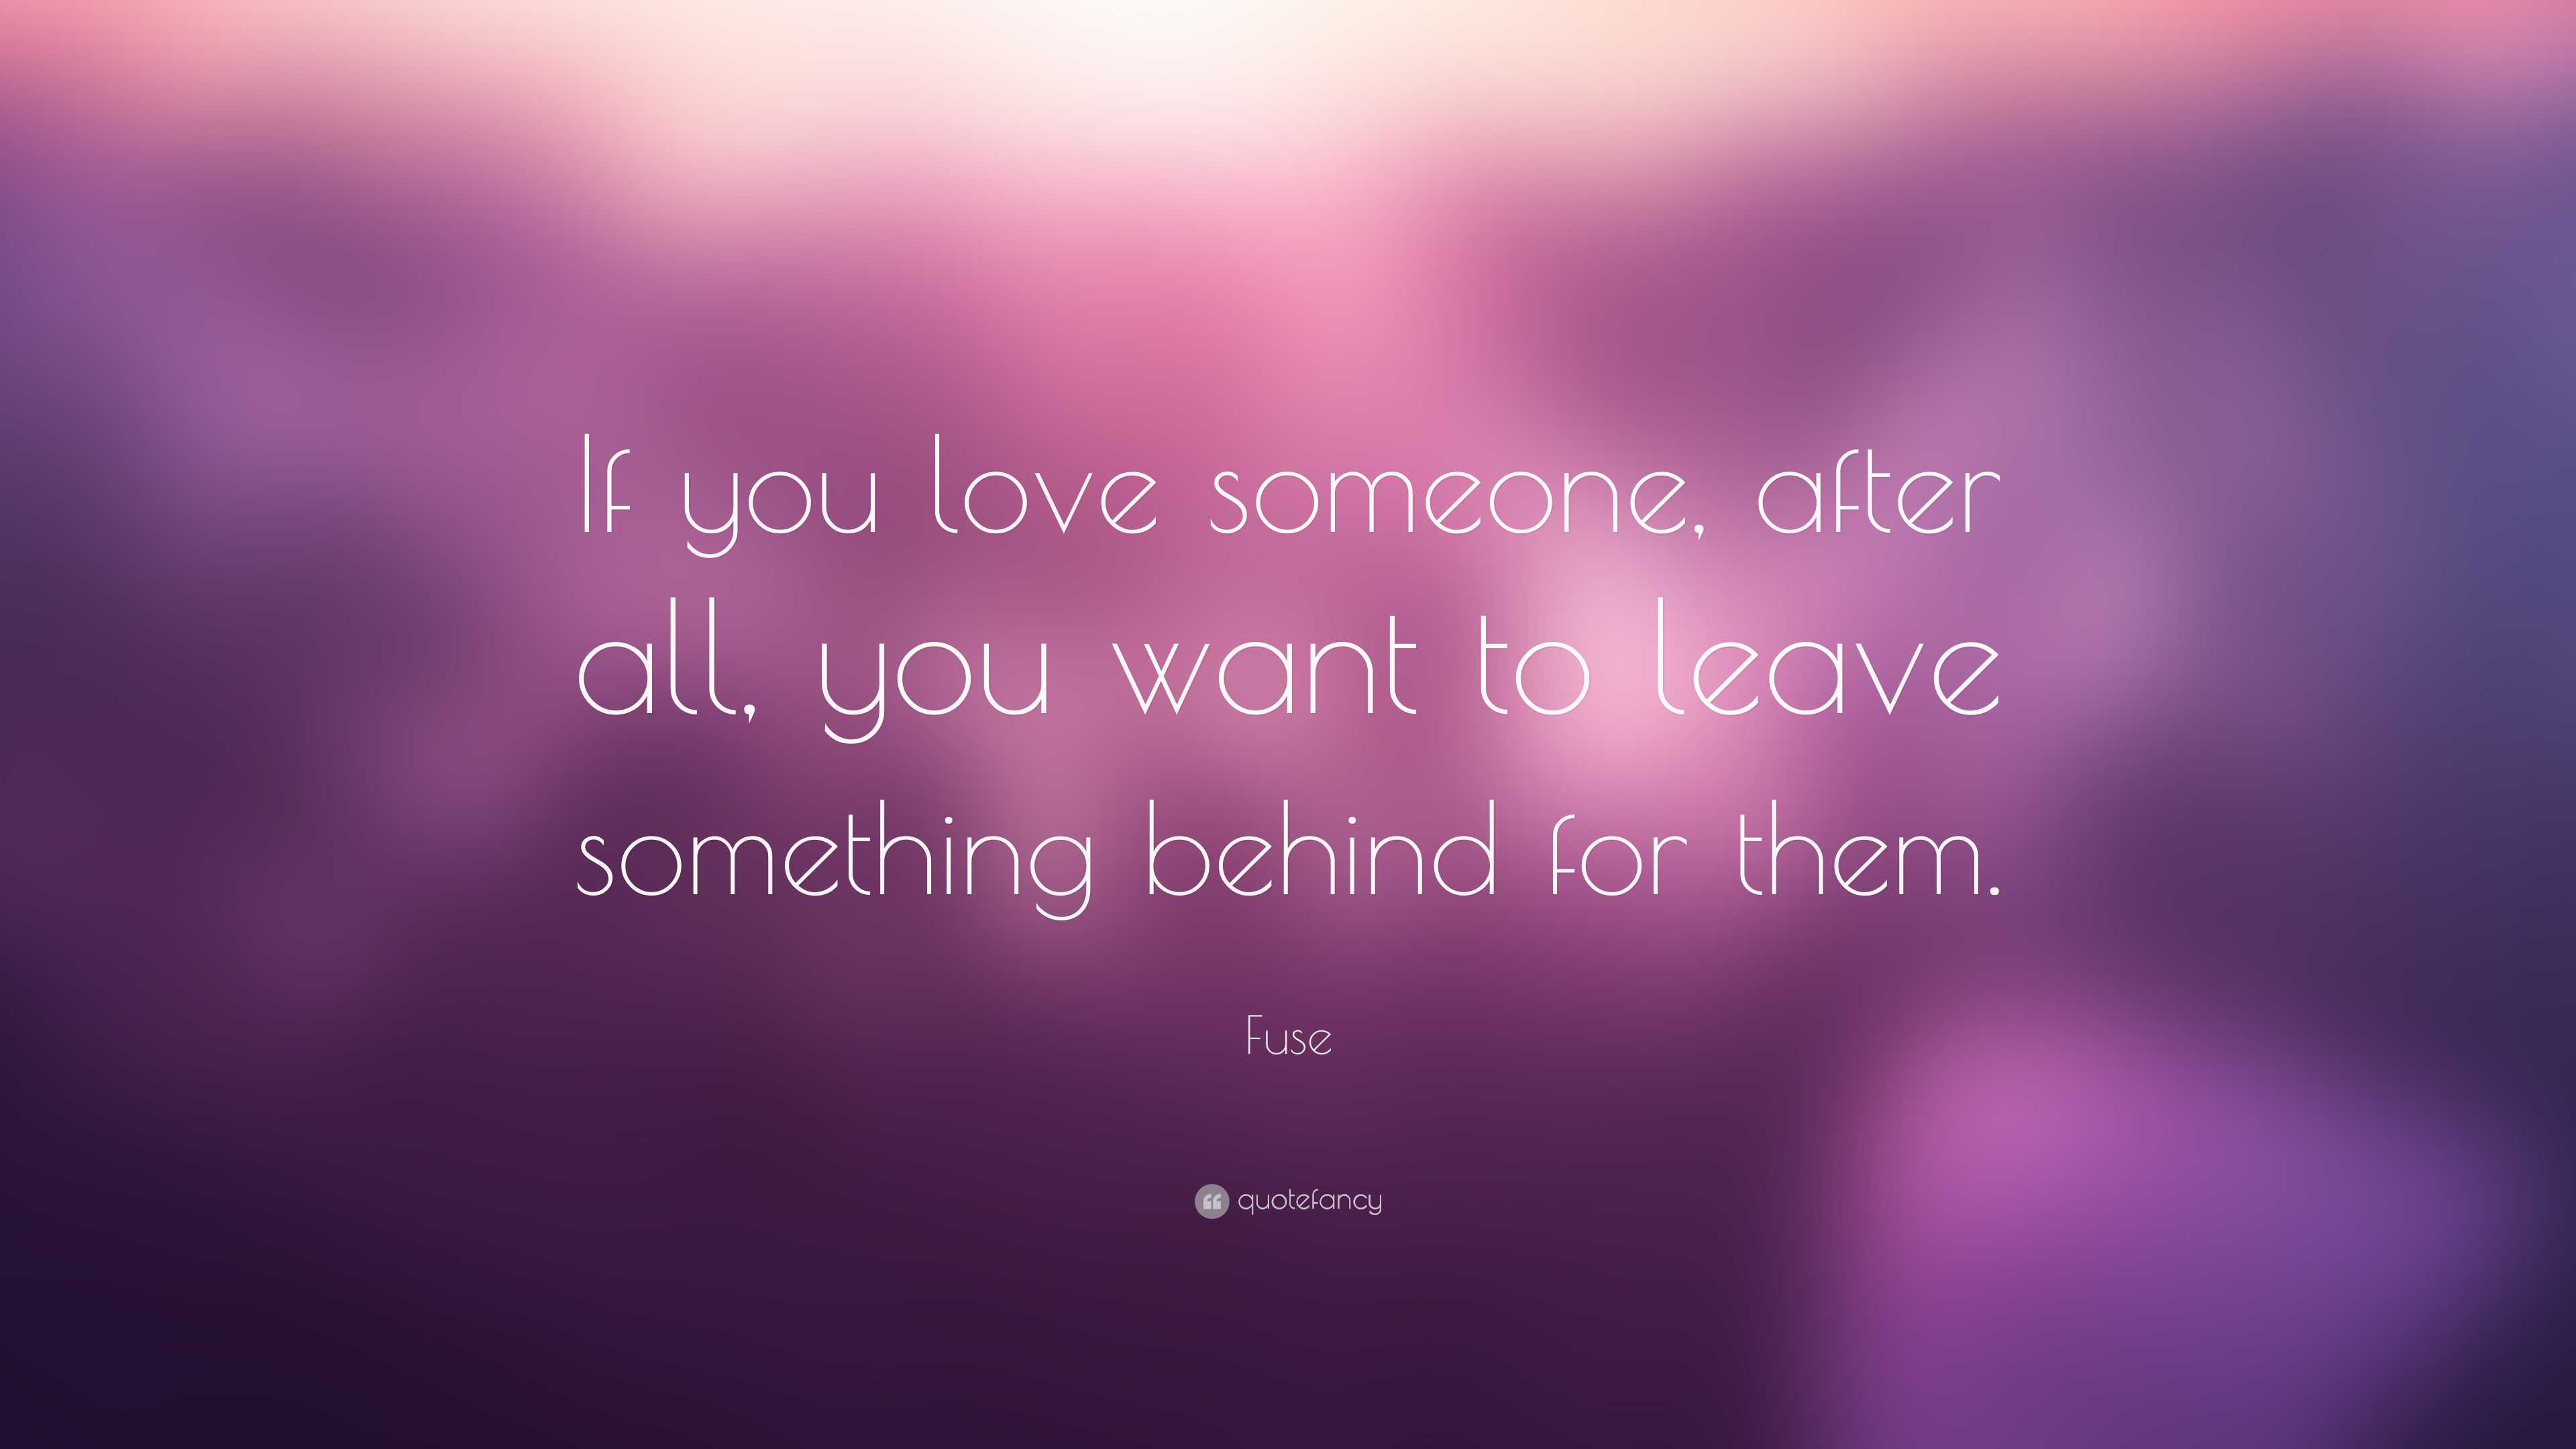 Fuse Quote: “If you love someone, after all, you want to leave ...